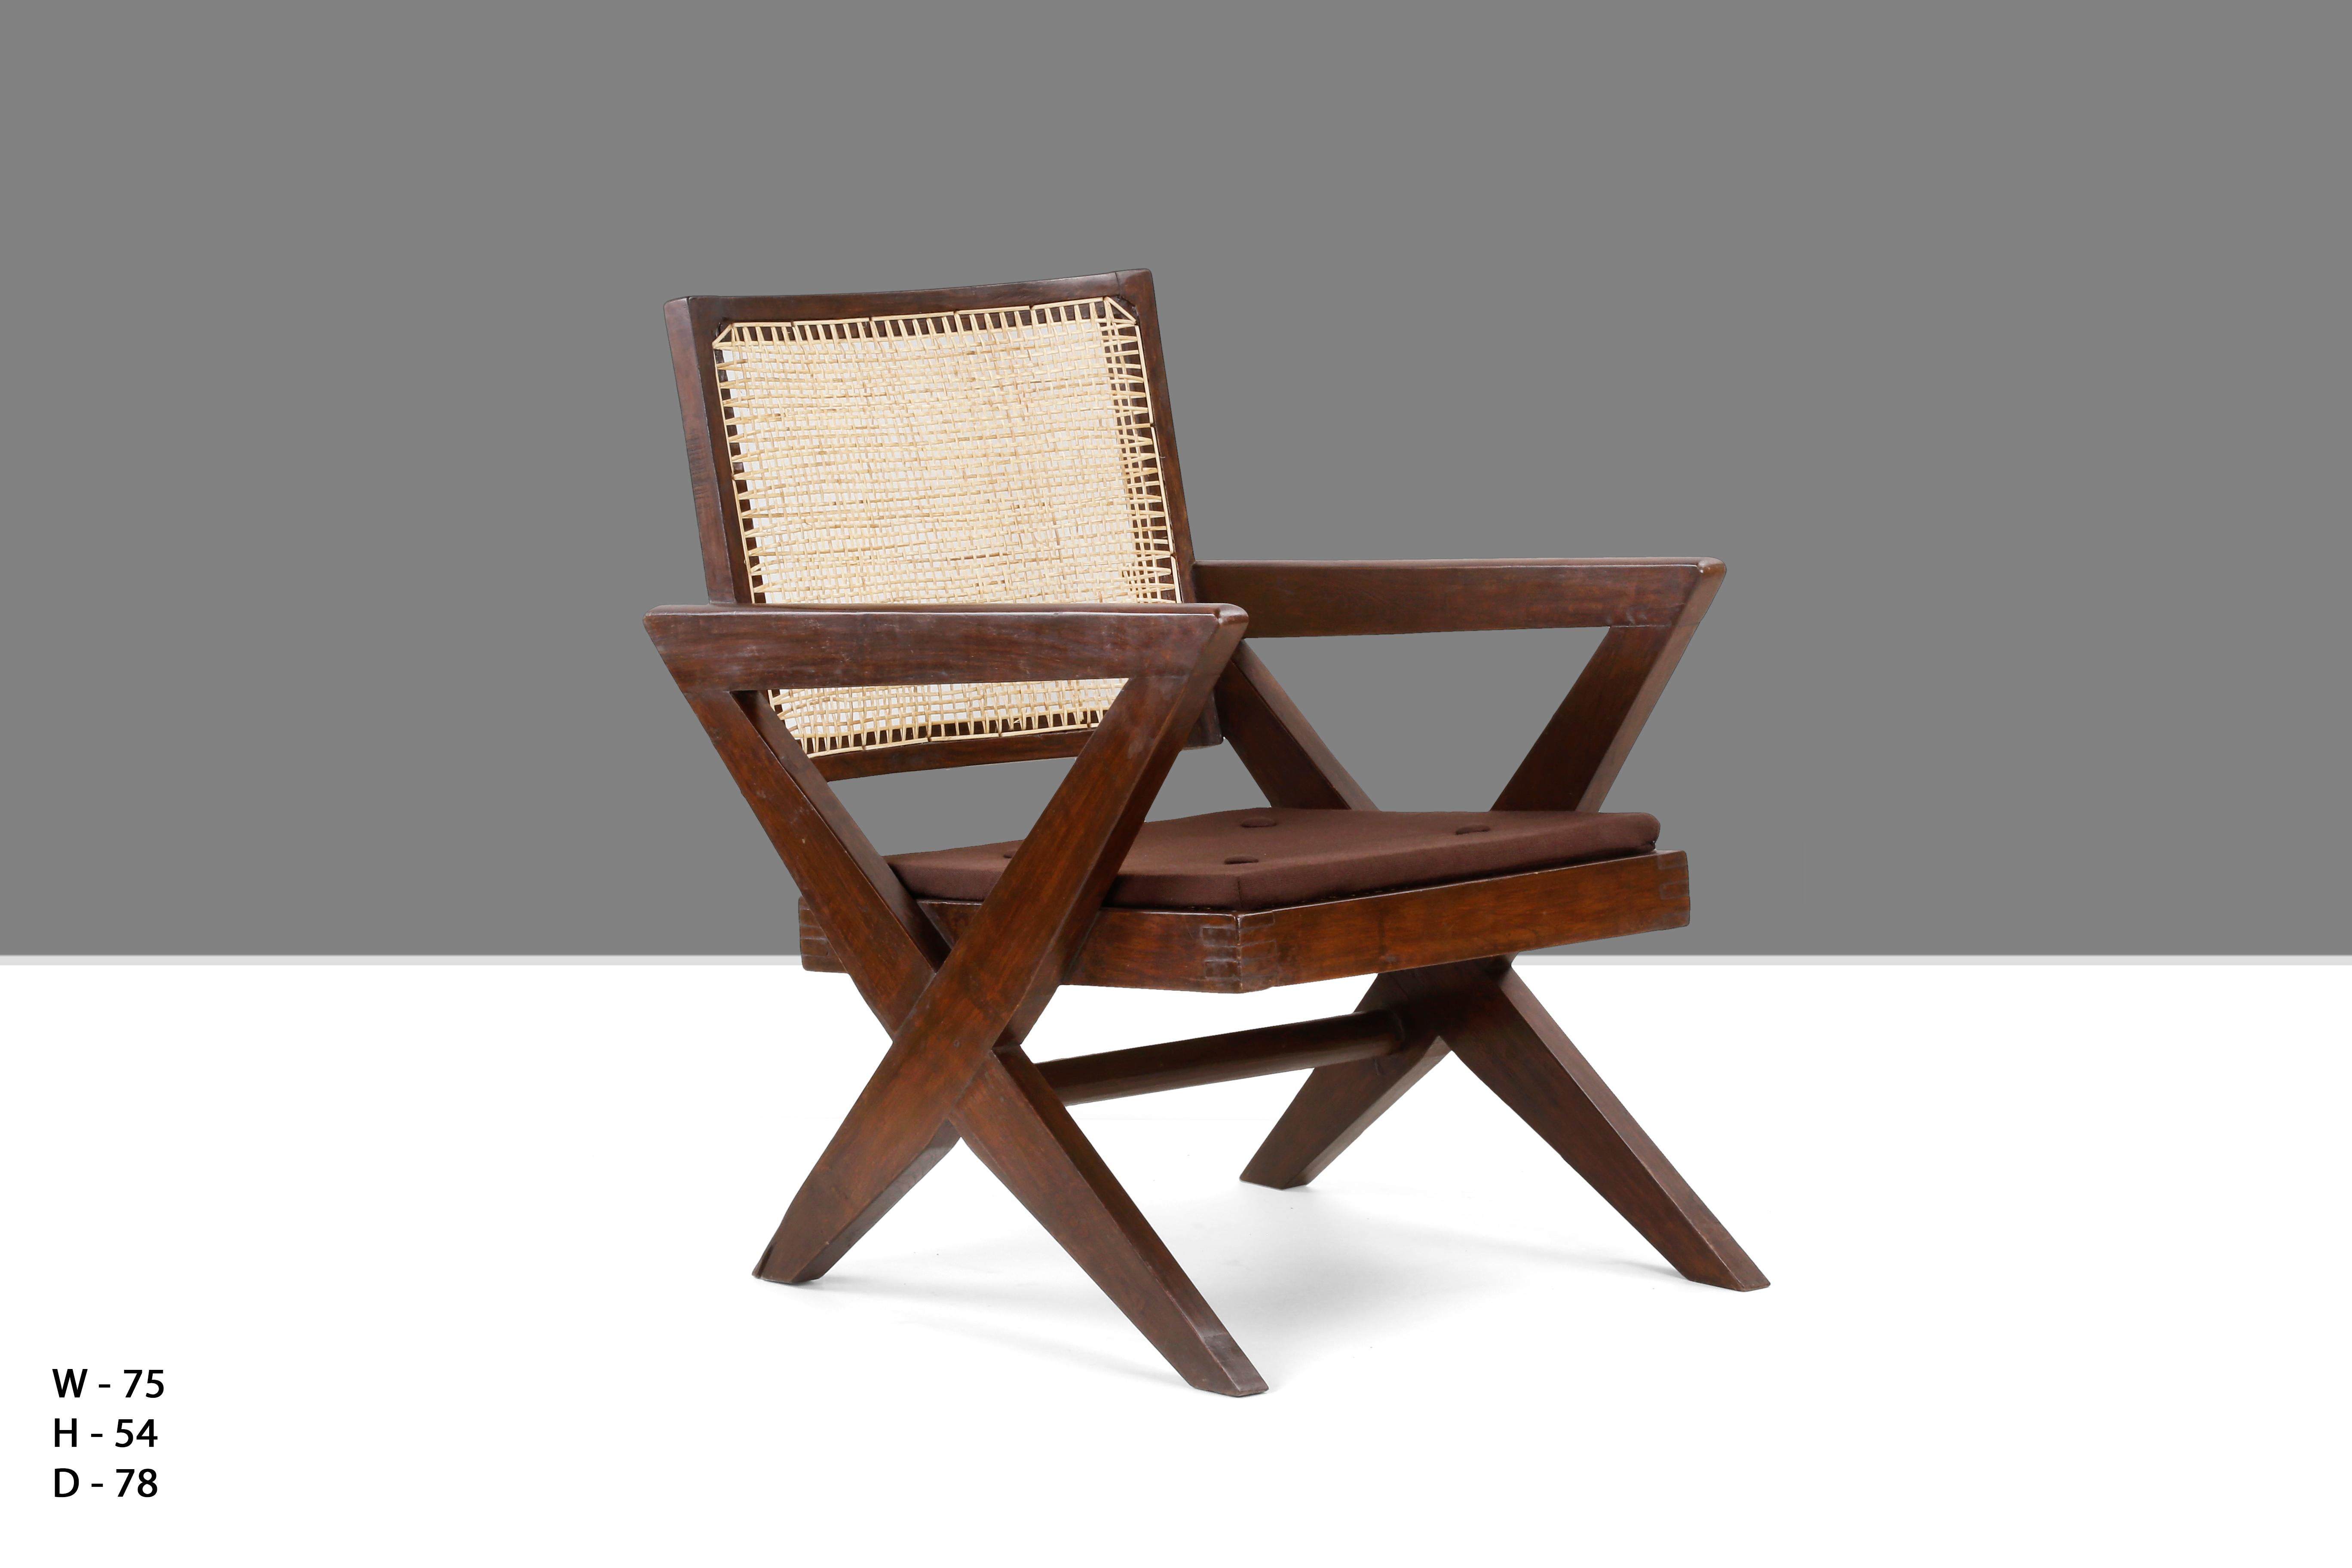 Rare armchair known as “Cross easy chair” in solid teak and braided canework, circa 1955-1956. We have two of them to offer. PJ-SI-45-A for Chandigarh. 

This chair is a fantastic piece, almost iconic. It is raw in its simplicity and 